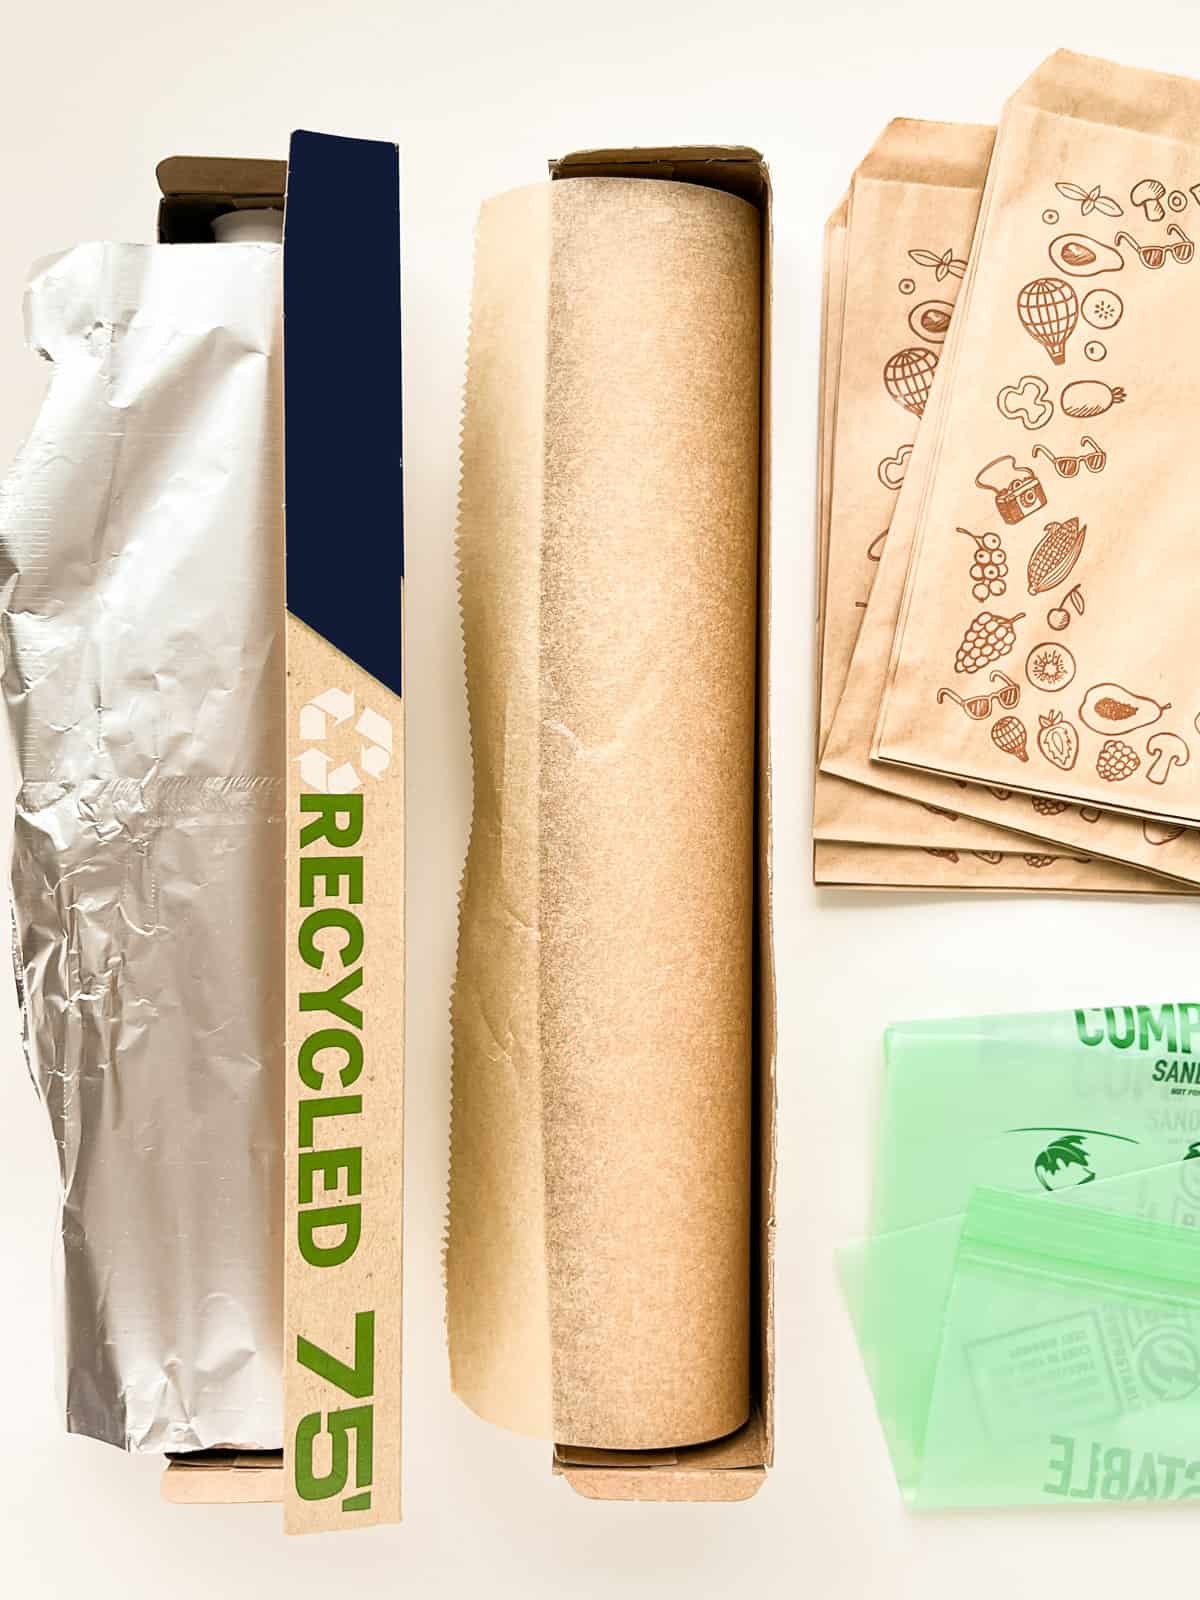 An image of a selection of recycled, recyclable, and compostable kitchen wrapping items including foi, parchment, paper bags and compostable plastic bags.